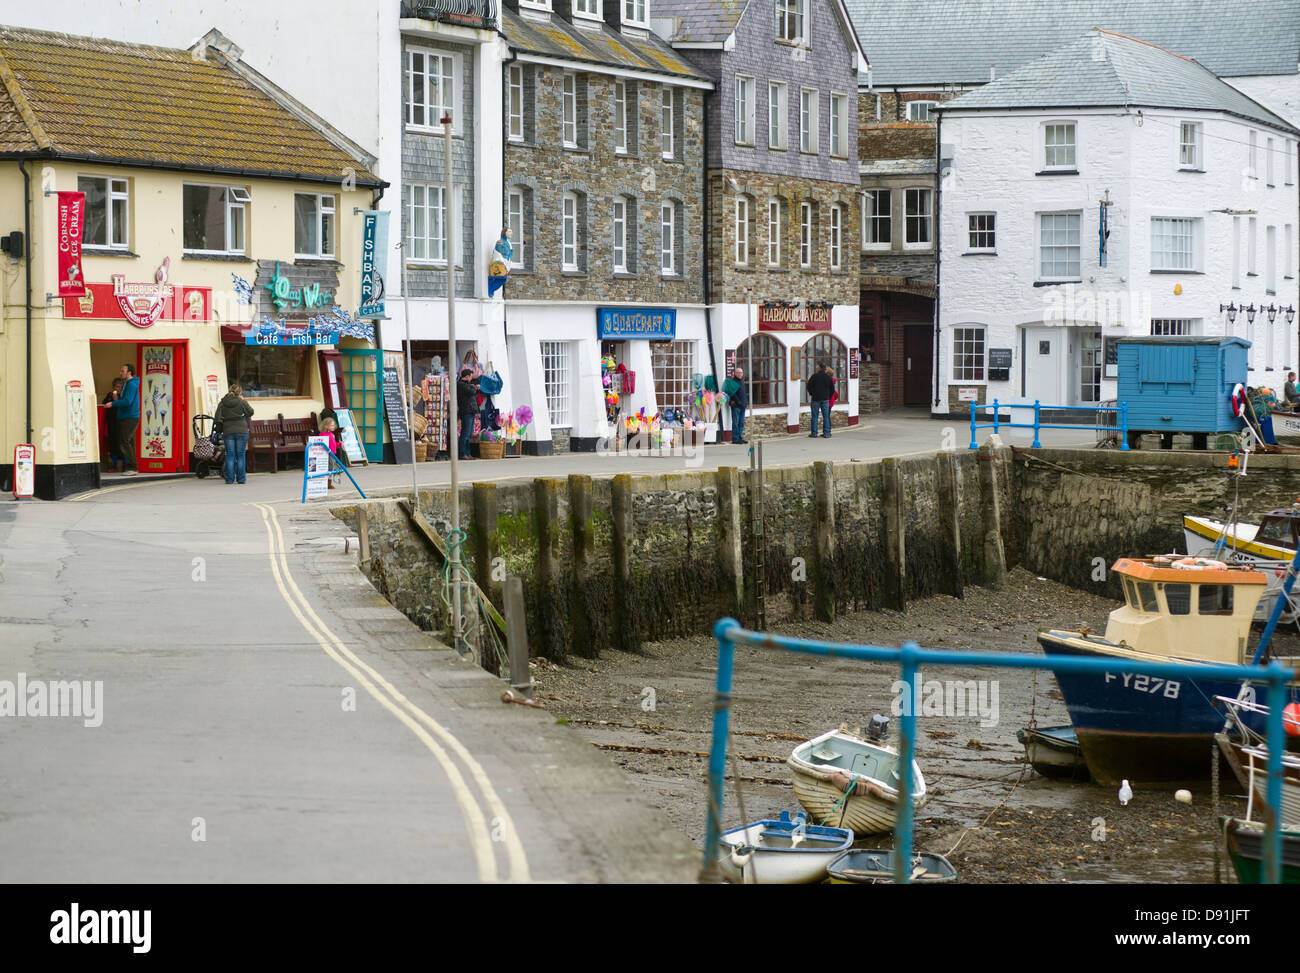 The road by the harbour in Mevagissey, Cornwall, England, UK Stock Photo